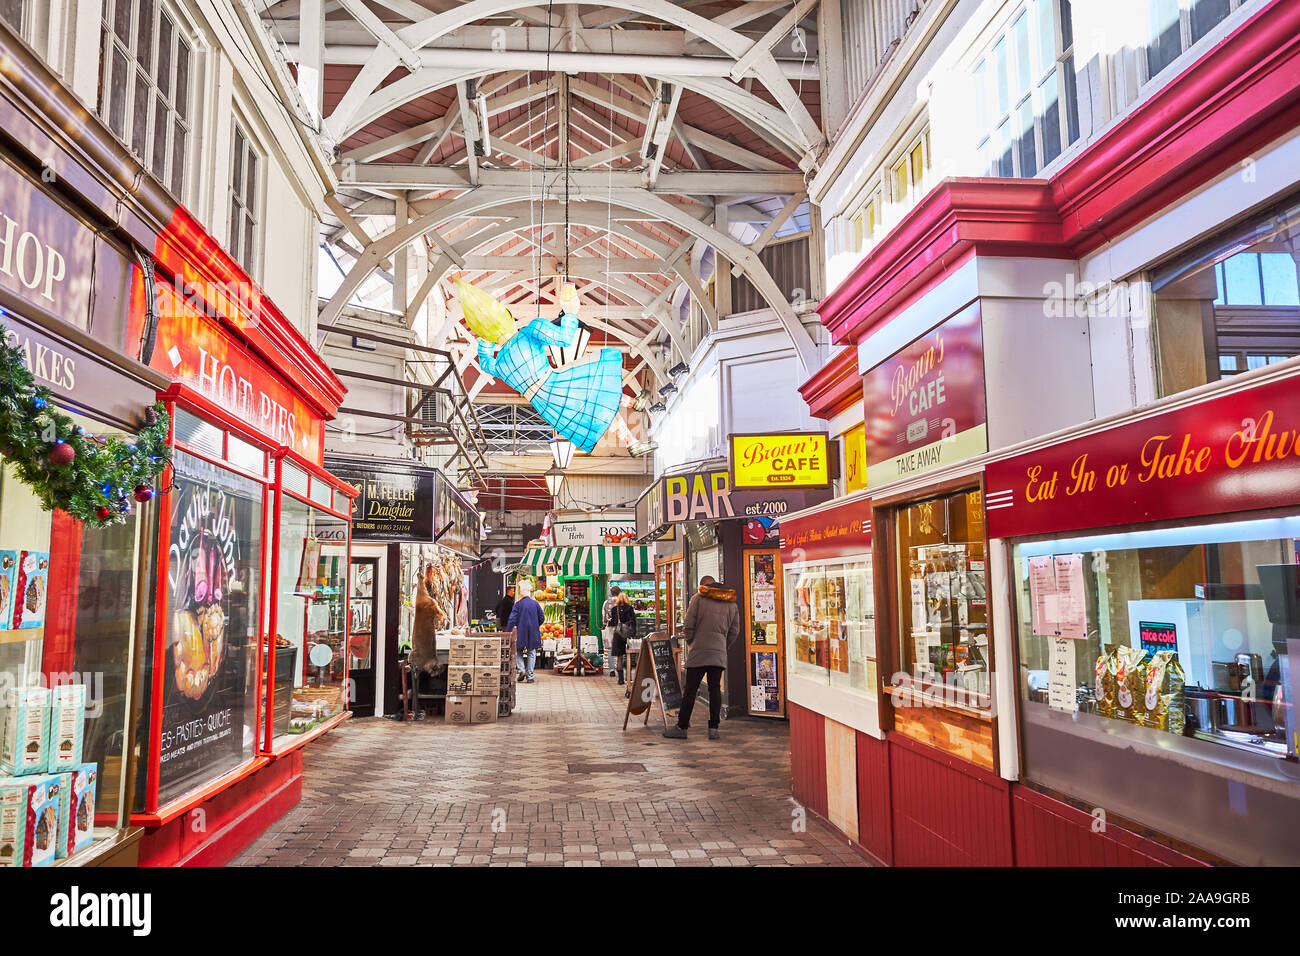 The indoor covered market at christmastime 2019, Oxford, England, with an Alice in Wonderland theme. Stock Photo